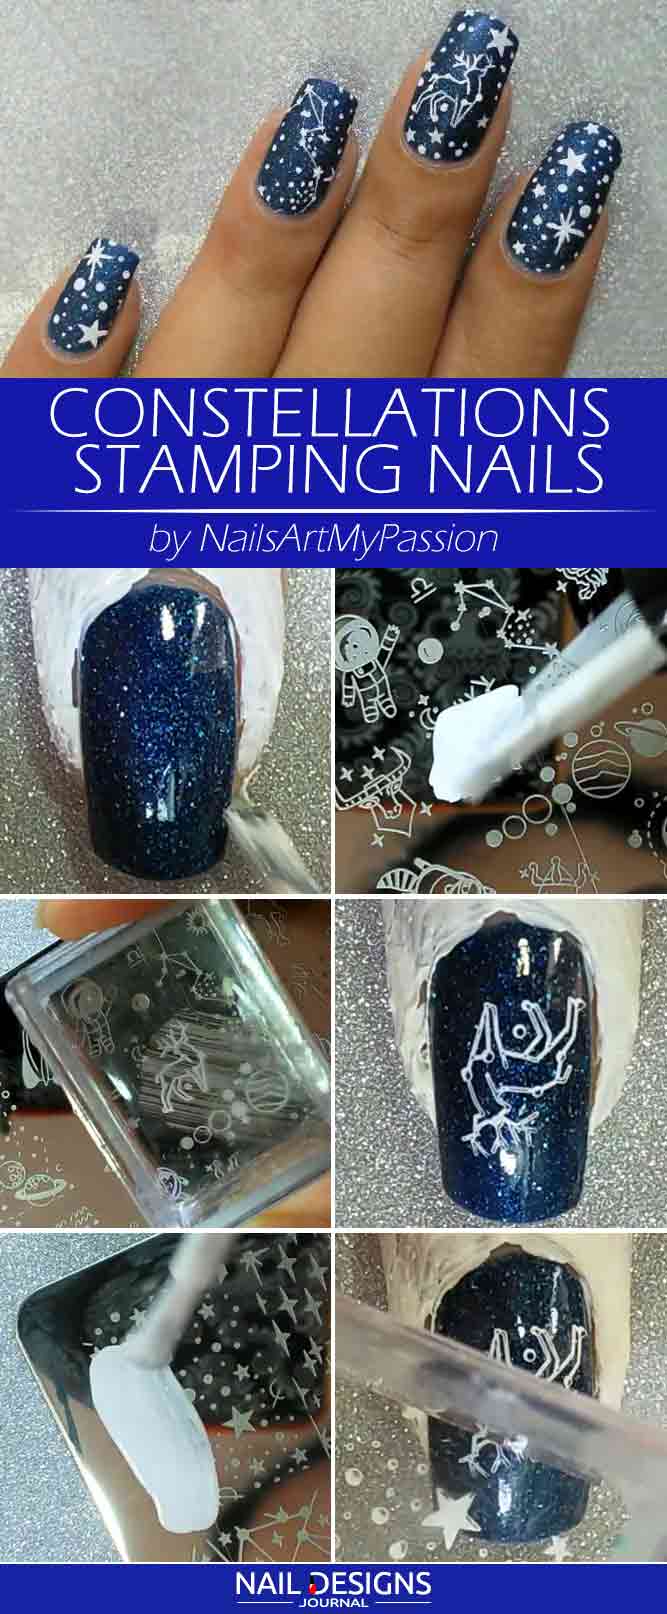 Constellations Stamping Nails